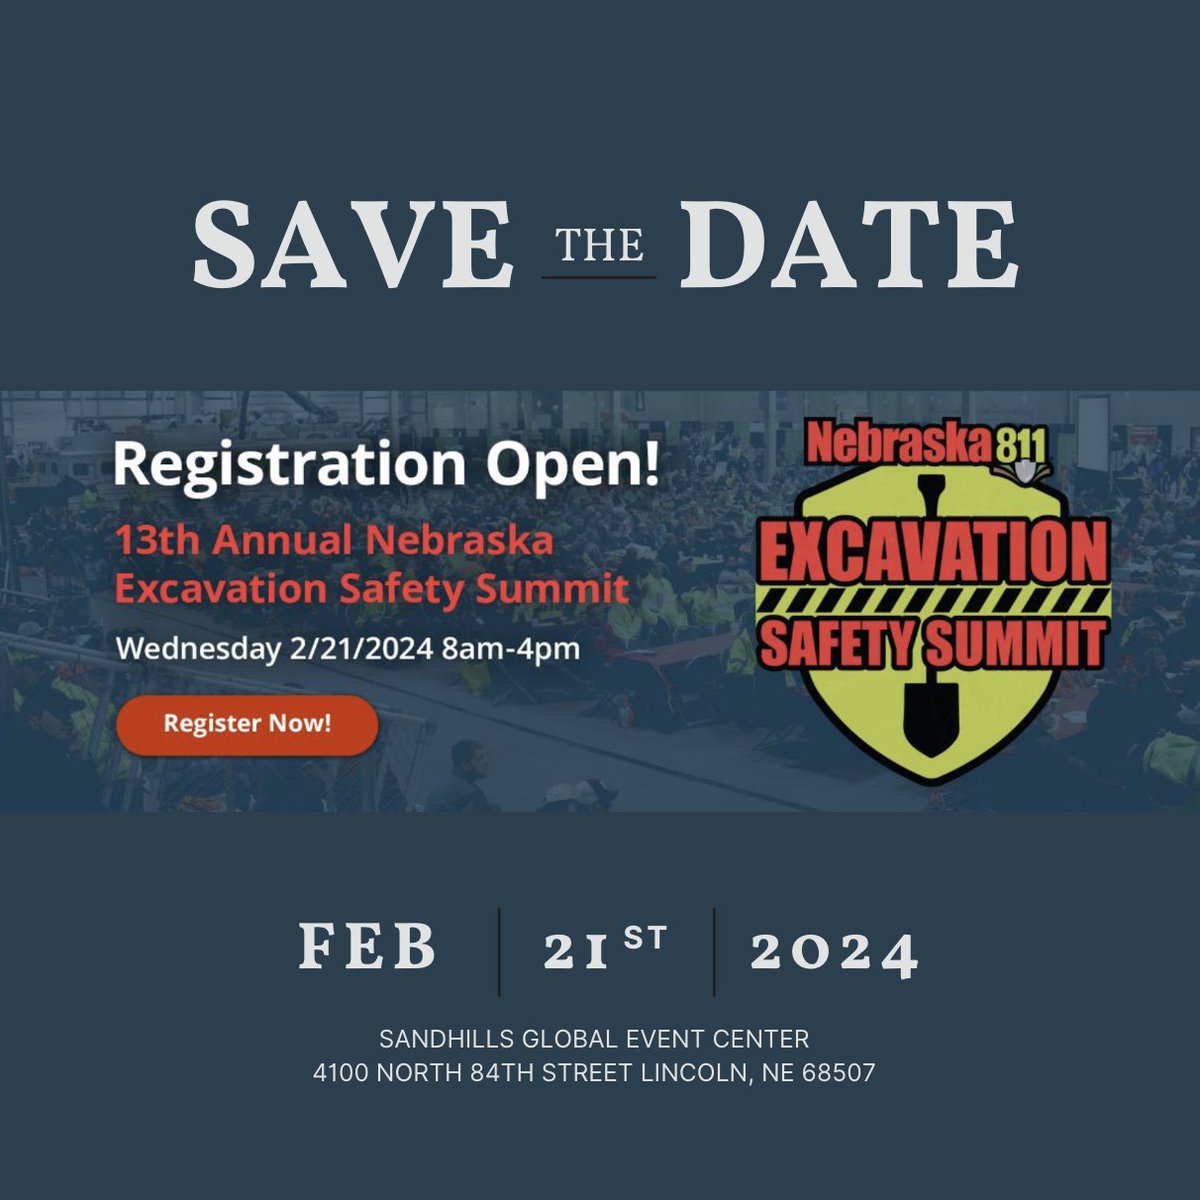 🚀 Gear up for the 13th Annual NE Excavation Safety Summit on Feb 21! 🏗️ Explore industry connections, join Rodeos, and network over free meals. IMPORTANT: New name, same location! Don't miss out! #ExcavationSafety #SaveTheDate #NEEvents eventbrite.com/e/2024-nebrask…?